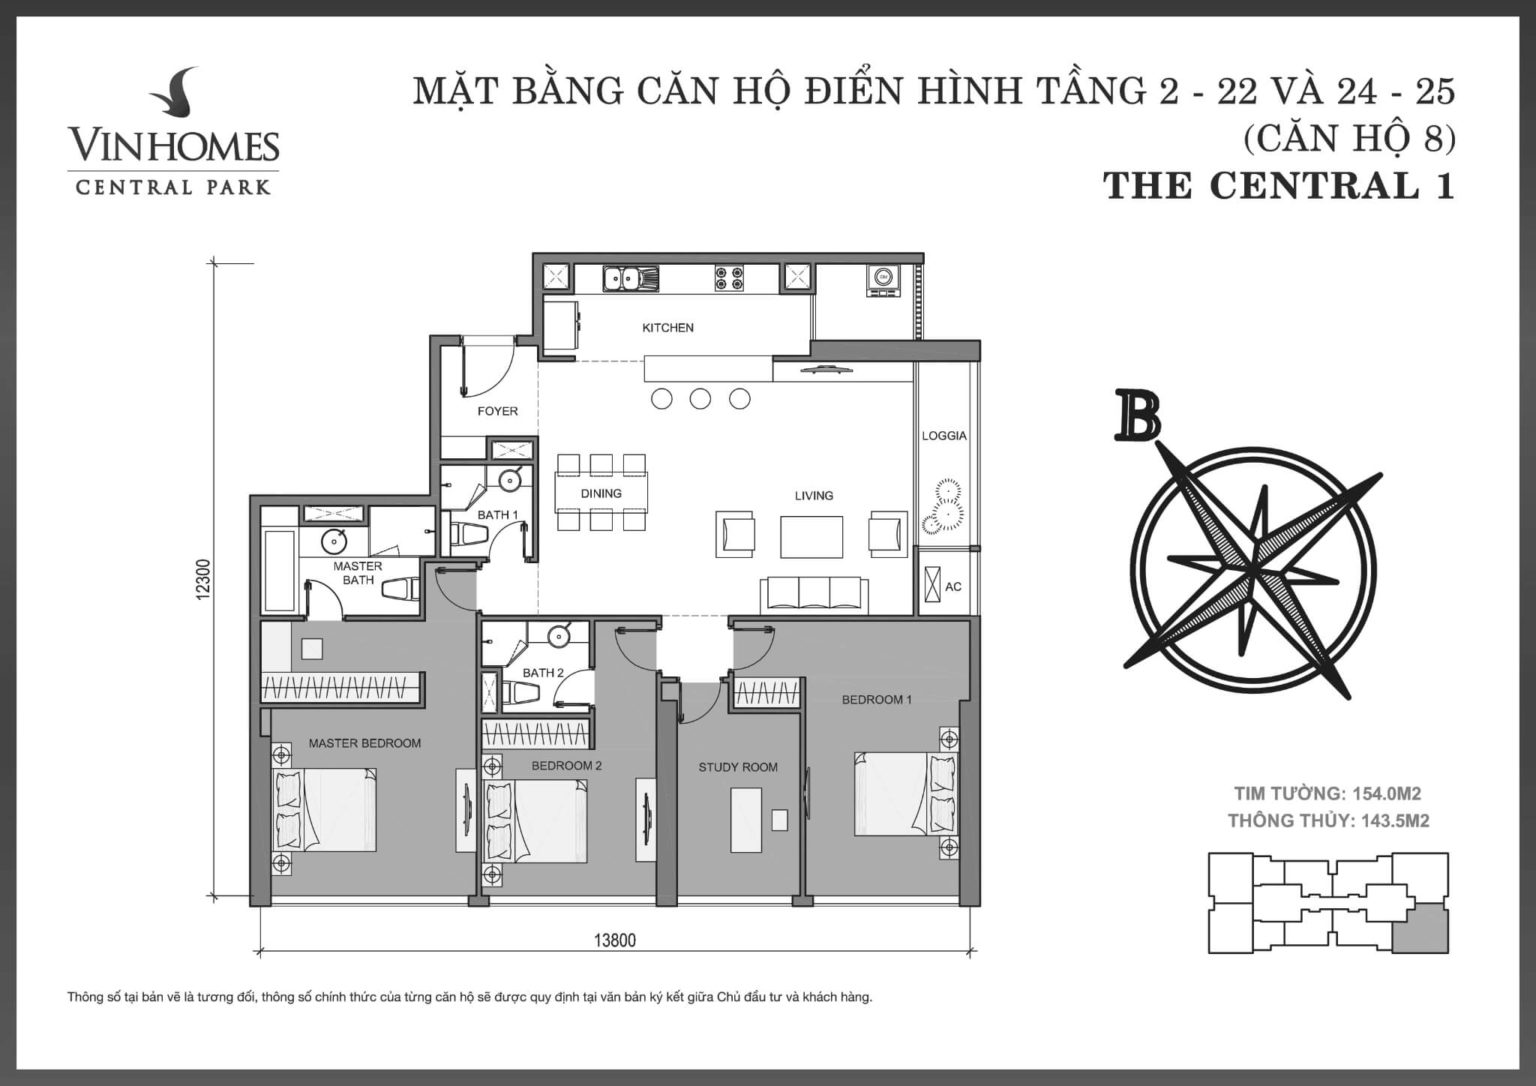 202301/01/08/192458-layout-central-c1-08-tang-02-25-1536x1086.jpg